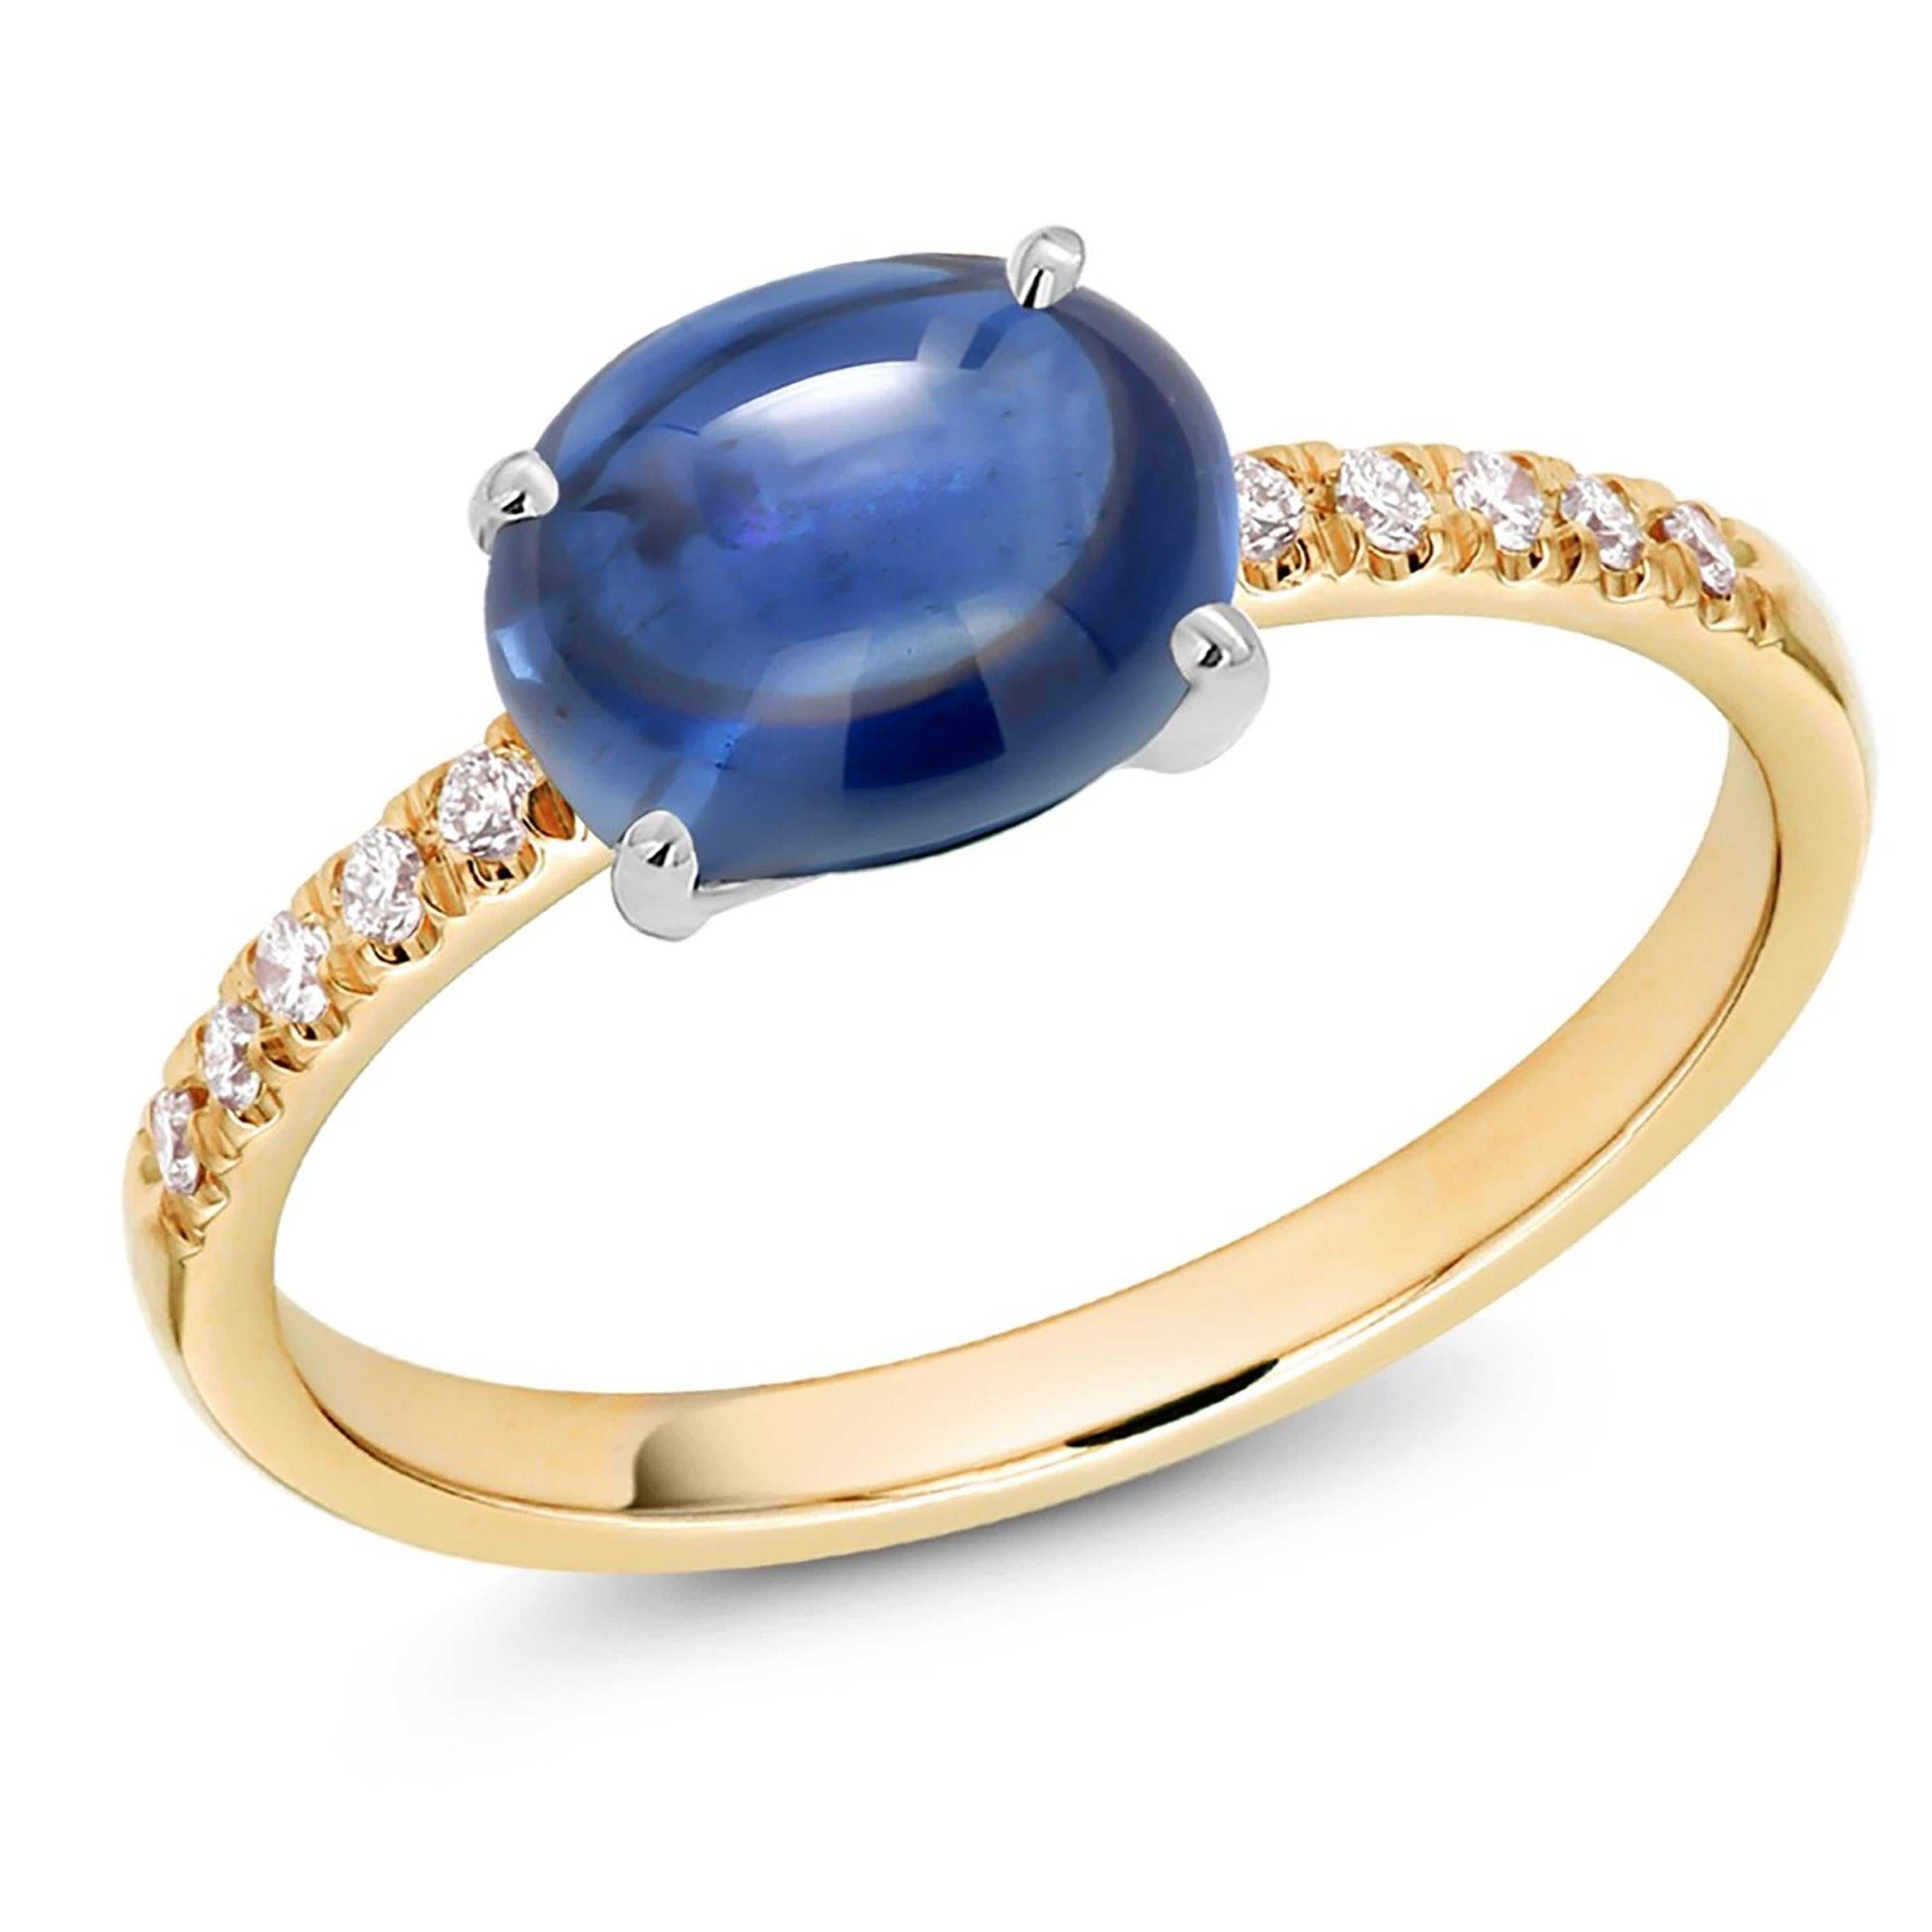 Oval Cut Ceylon Cabochon Sapphire Diamond 3.65 Carat Yellow and White Gold Size 7 Ring For Sale